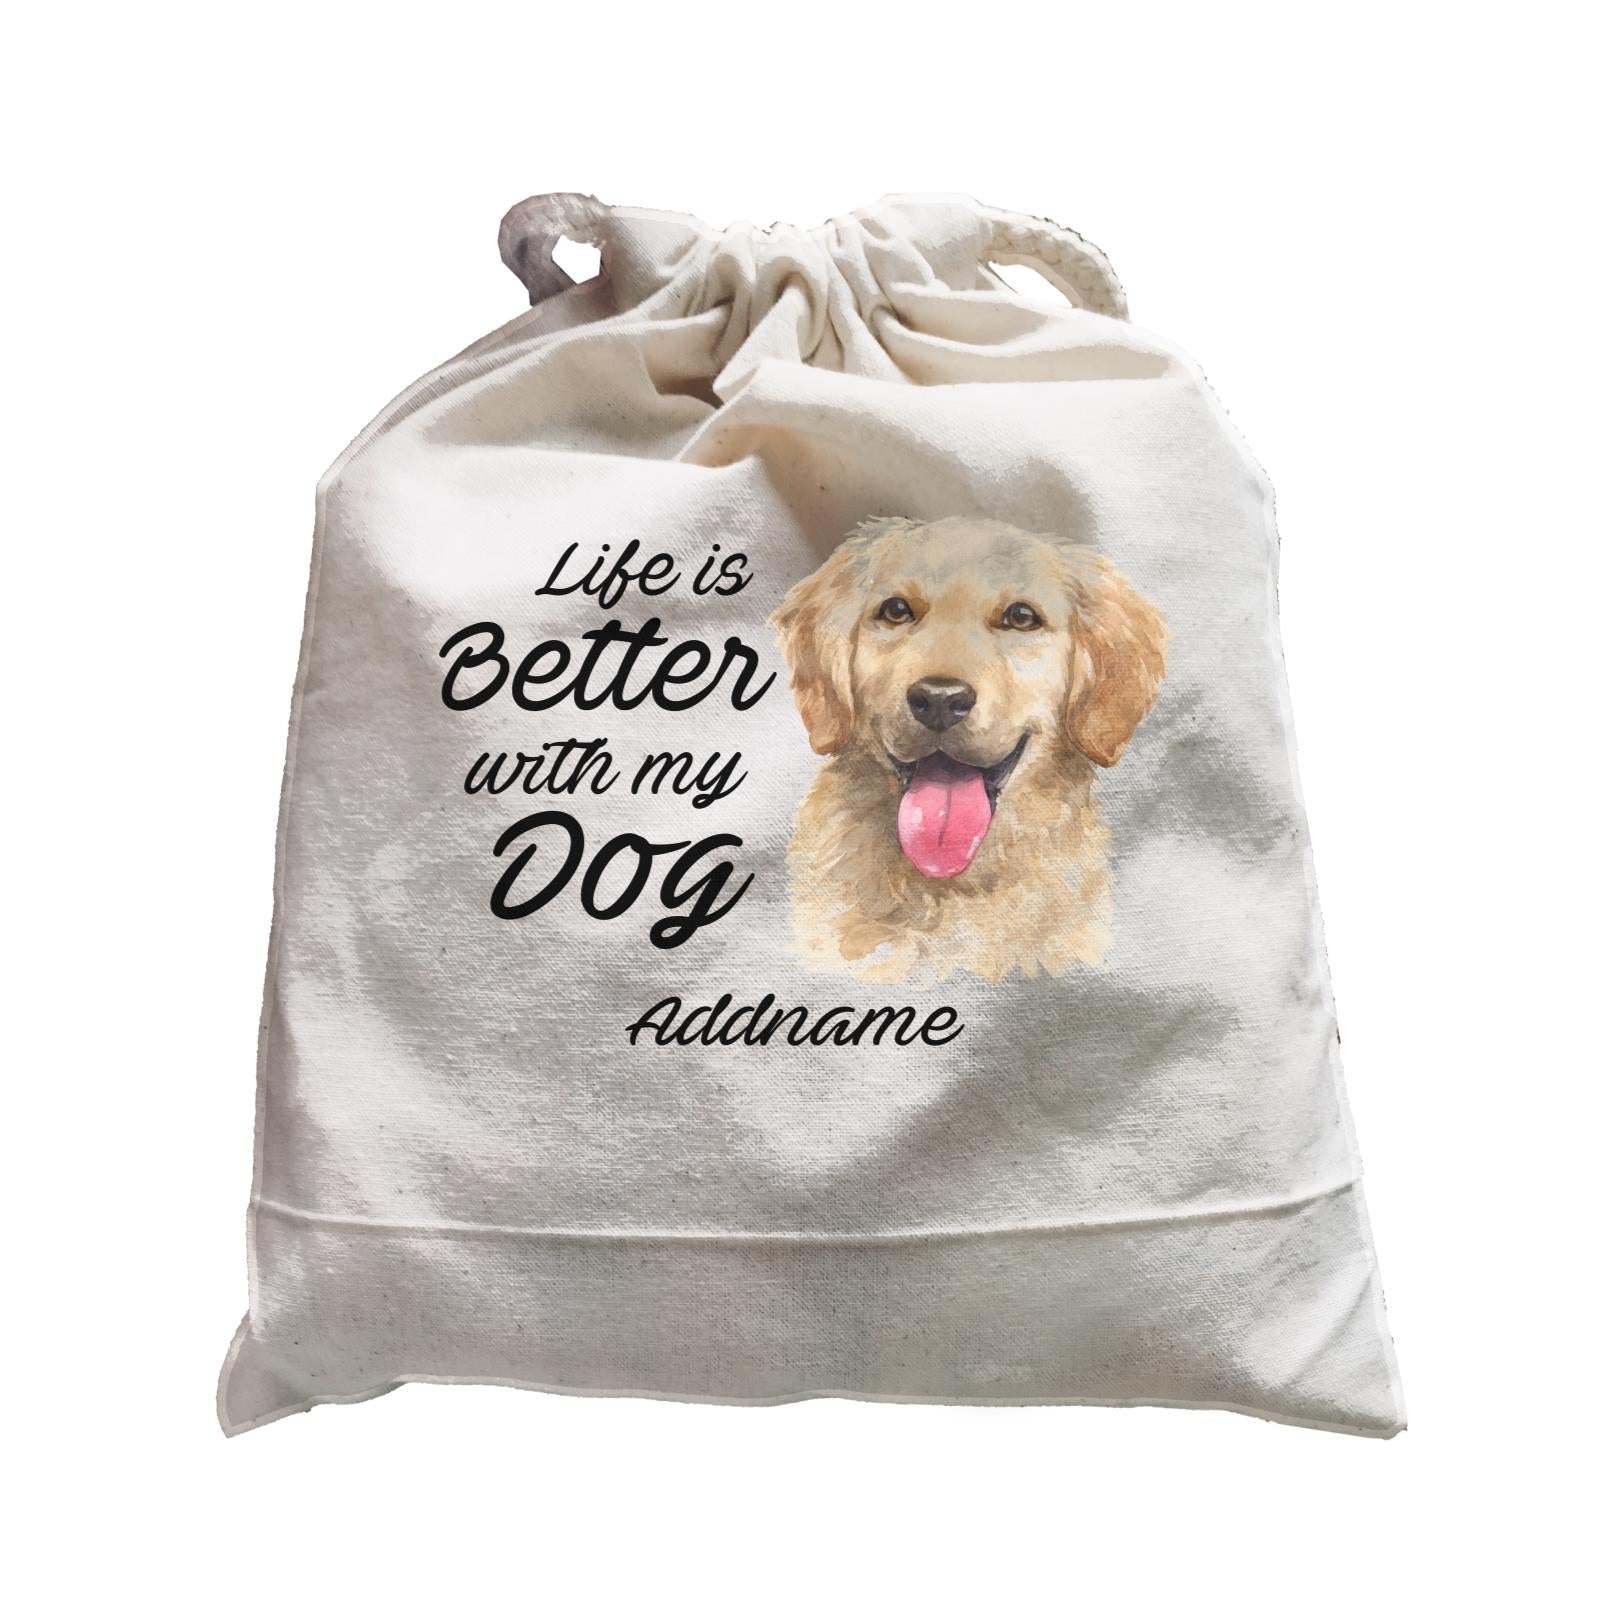 Watercolor Life is Better With My Dog Golden Retriever Front Addname Satchel